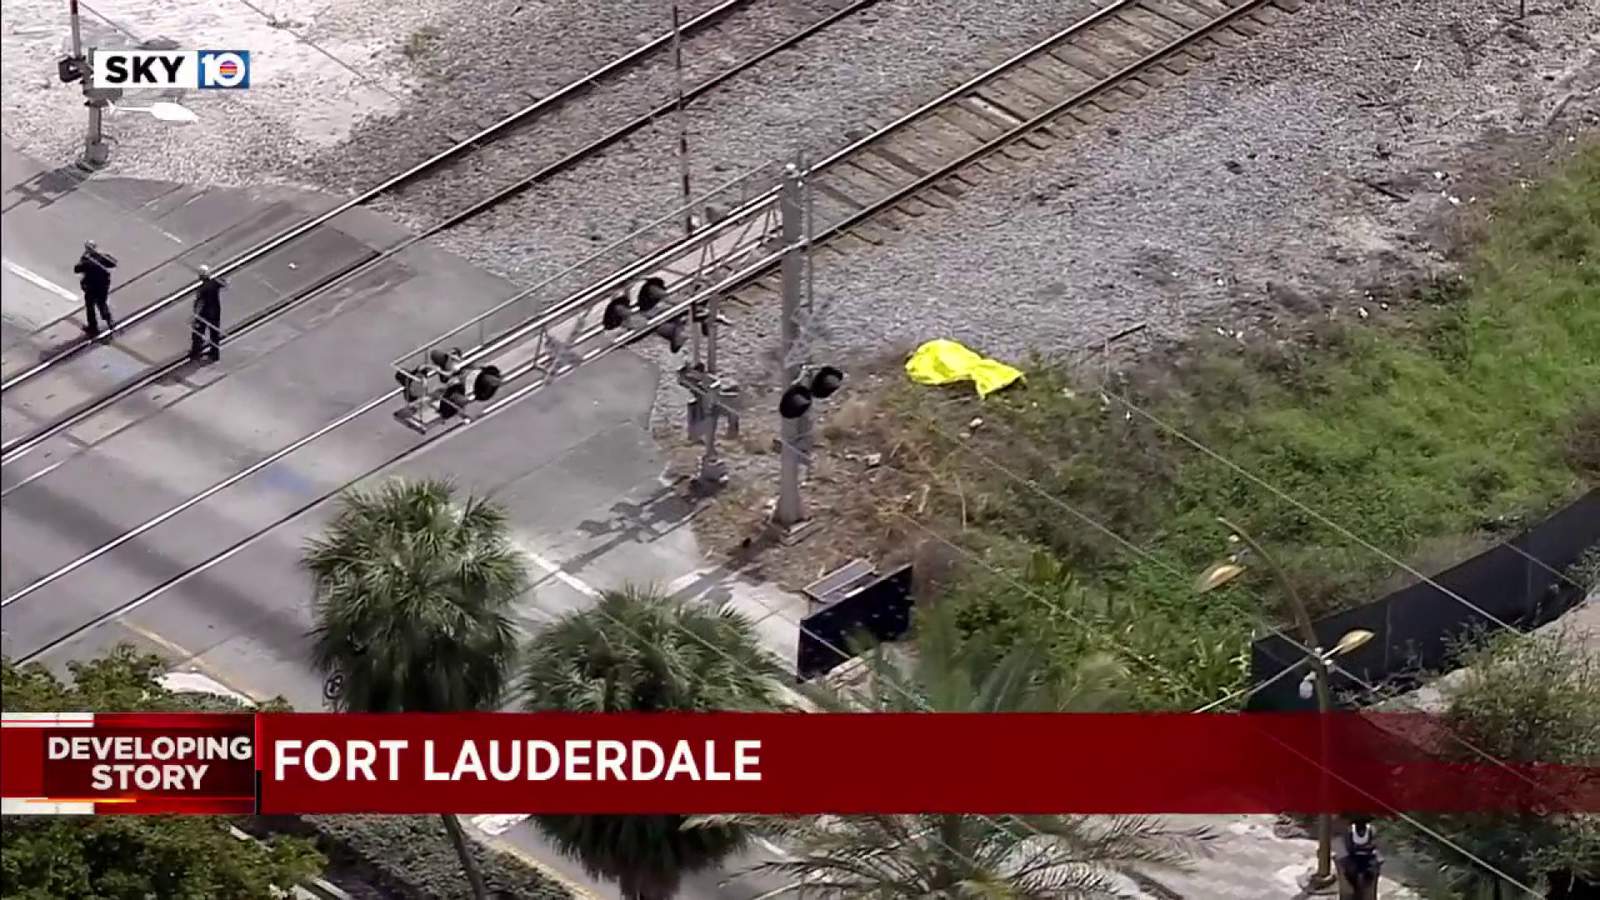 Man on scooter struck, killed by commuter train in Florida